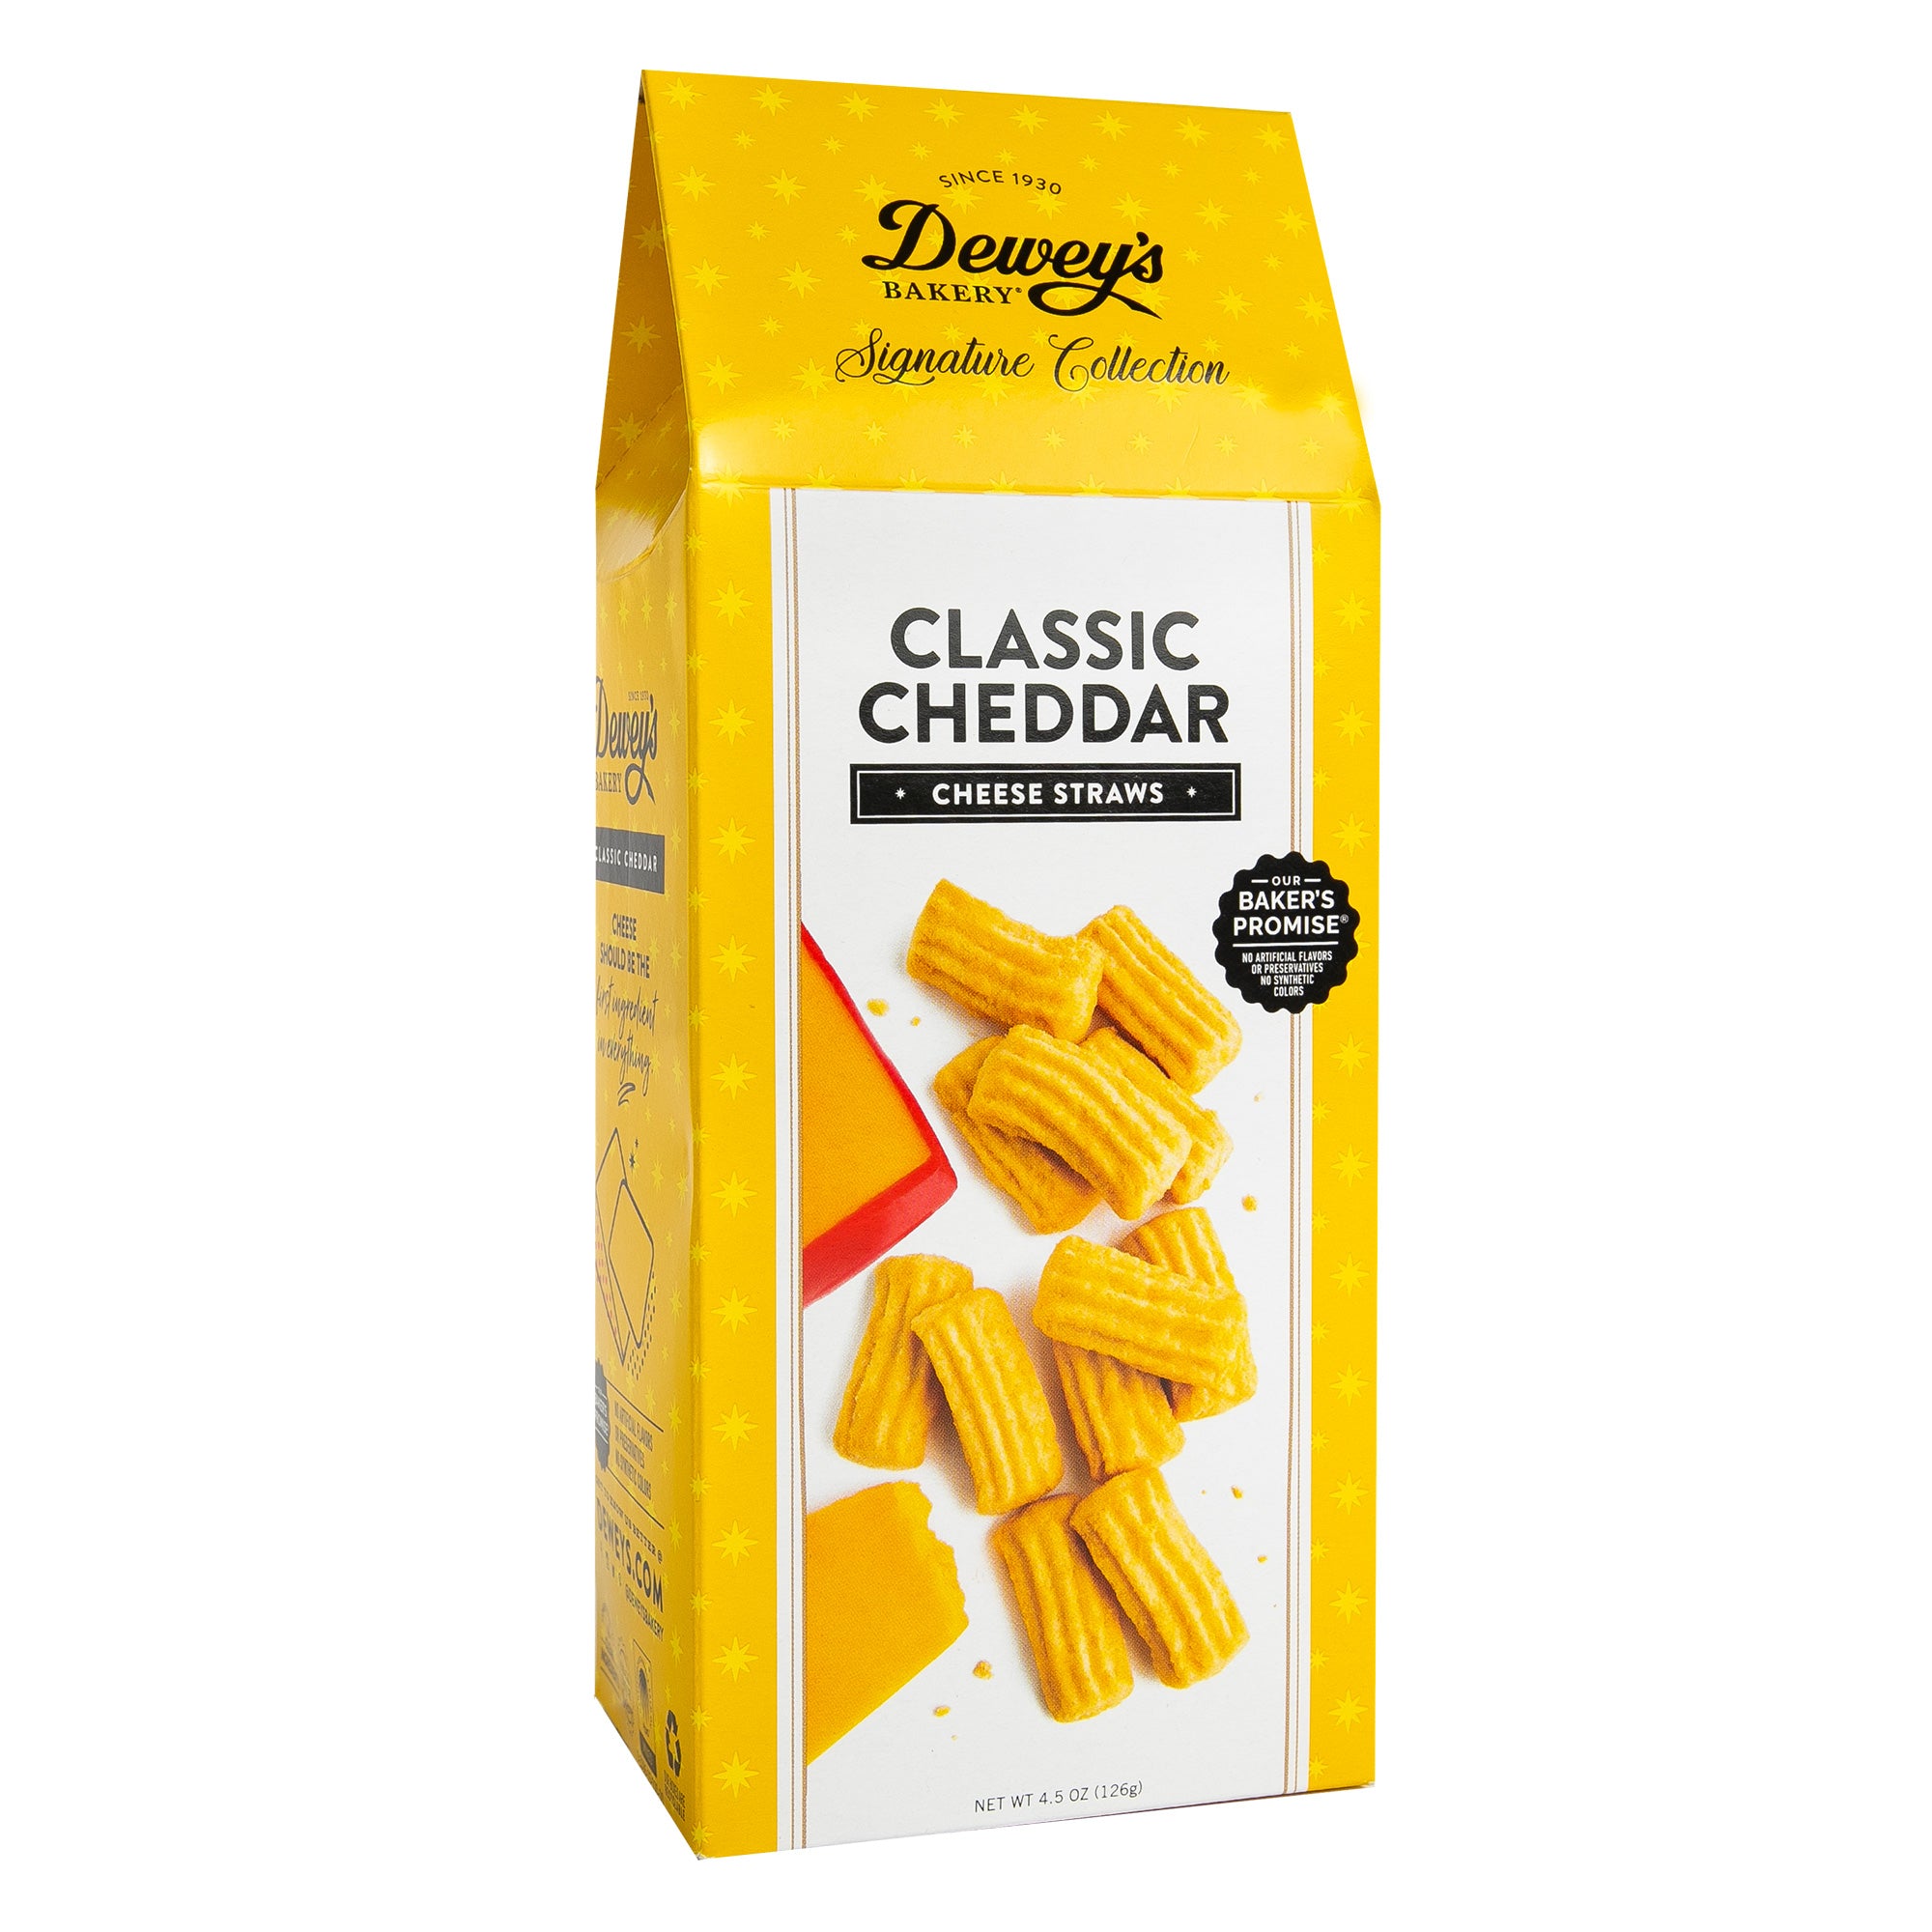 Classic Cheddar Cheese Straws, 4.5 Ounce